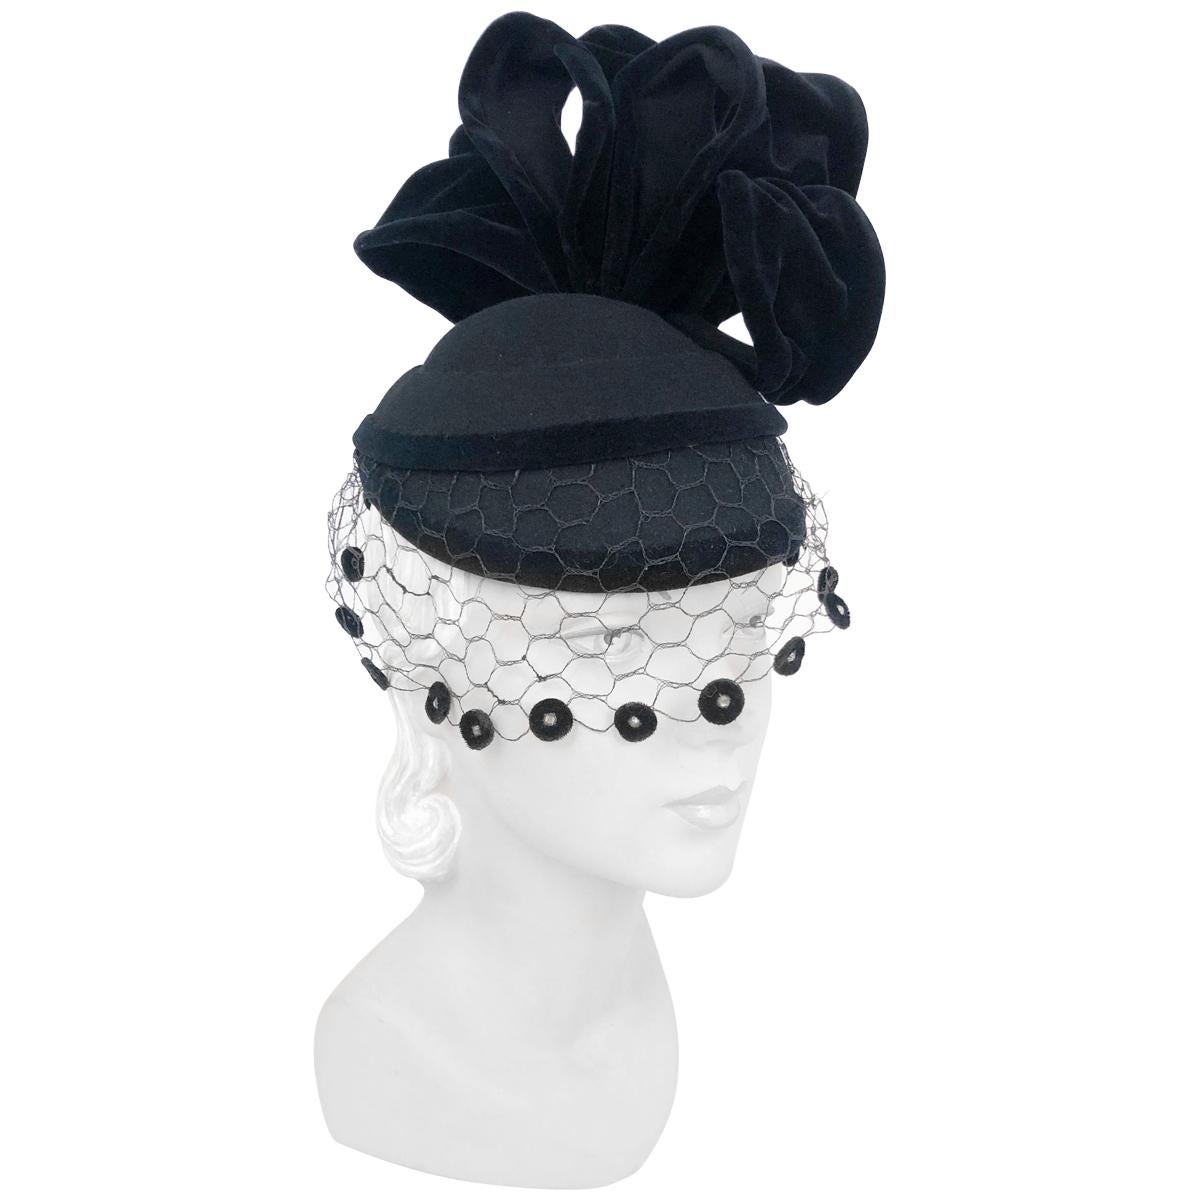 1930s Black Perch Hat with Structured Accents and Decorated Veil